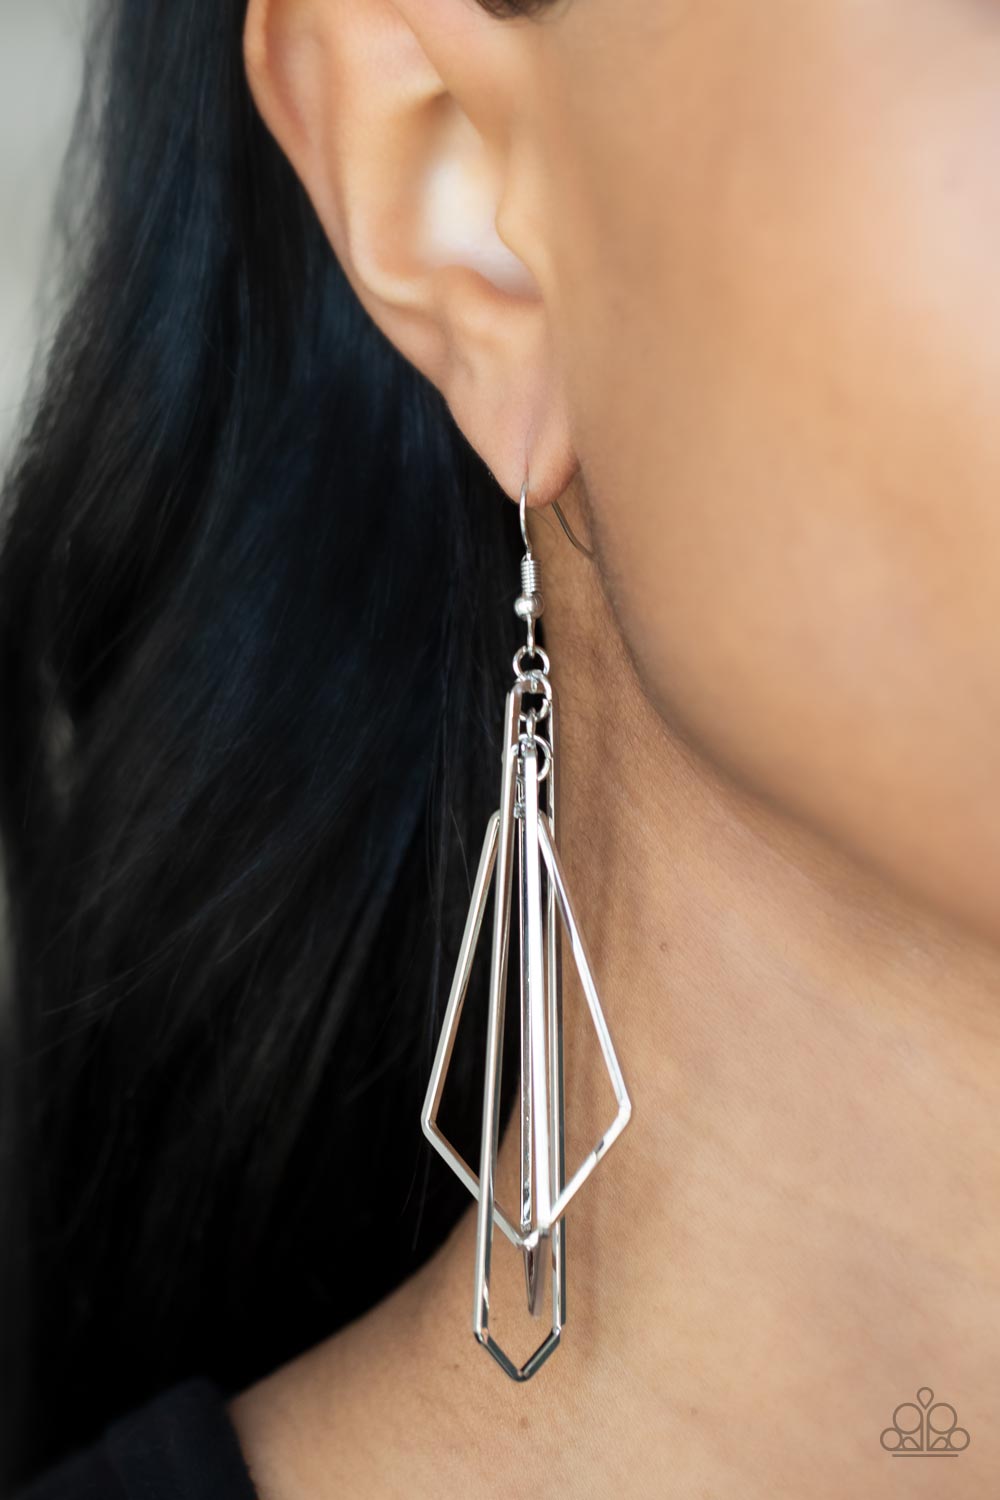 Shape Shifting Shimmer -Paparazzi Accessories Earrings Silver